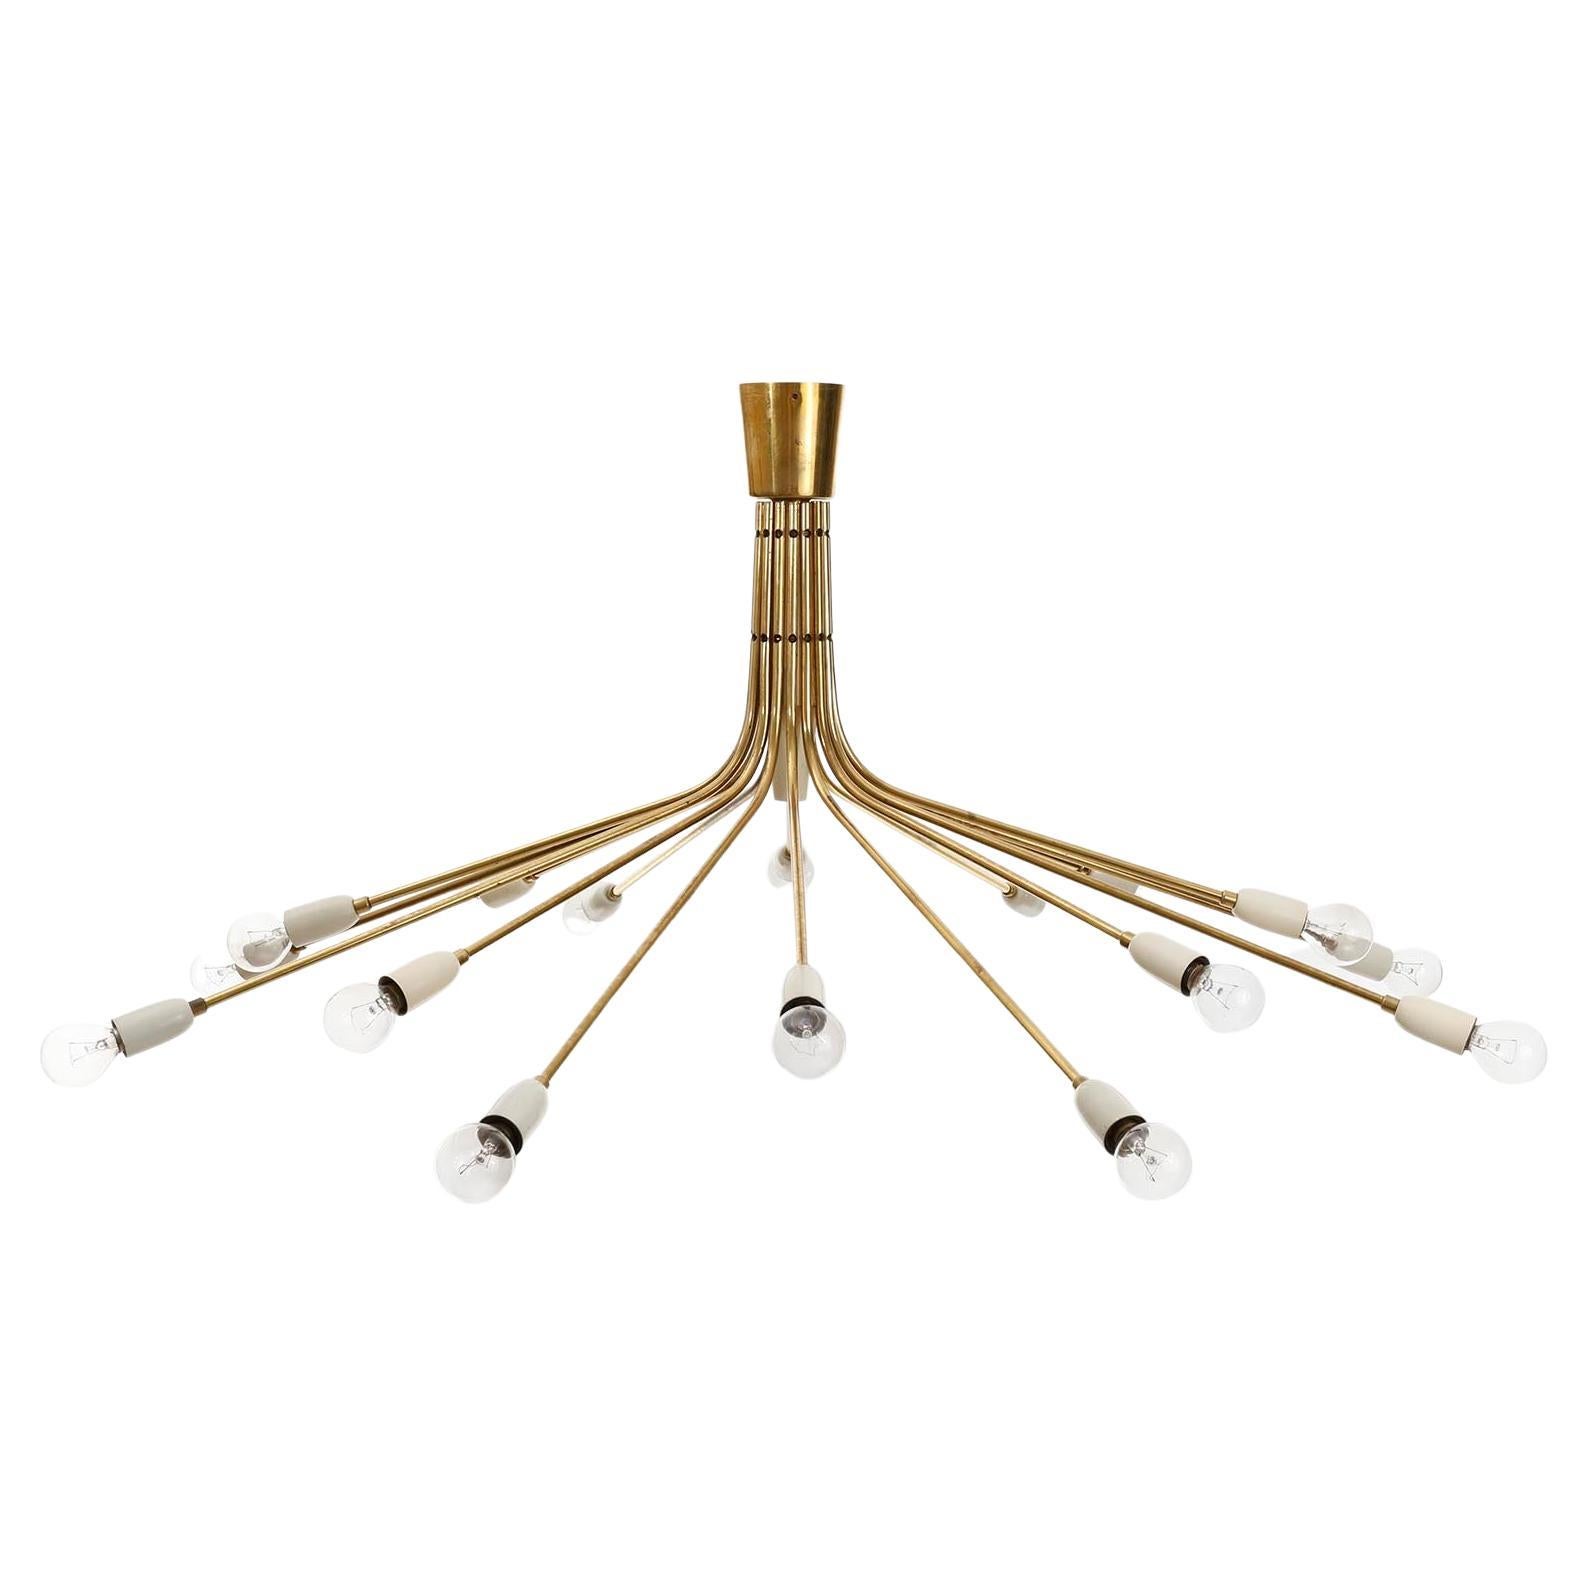 An Italian 16-arm flush mount ceiling fixture by Stilnovo, manufactured in Midcentury. A solid polished brass frame in warm aged tone with white lacquered fittings with nice patina on brass. This impressive chandelier holds 16 small base screw base